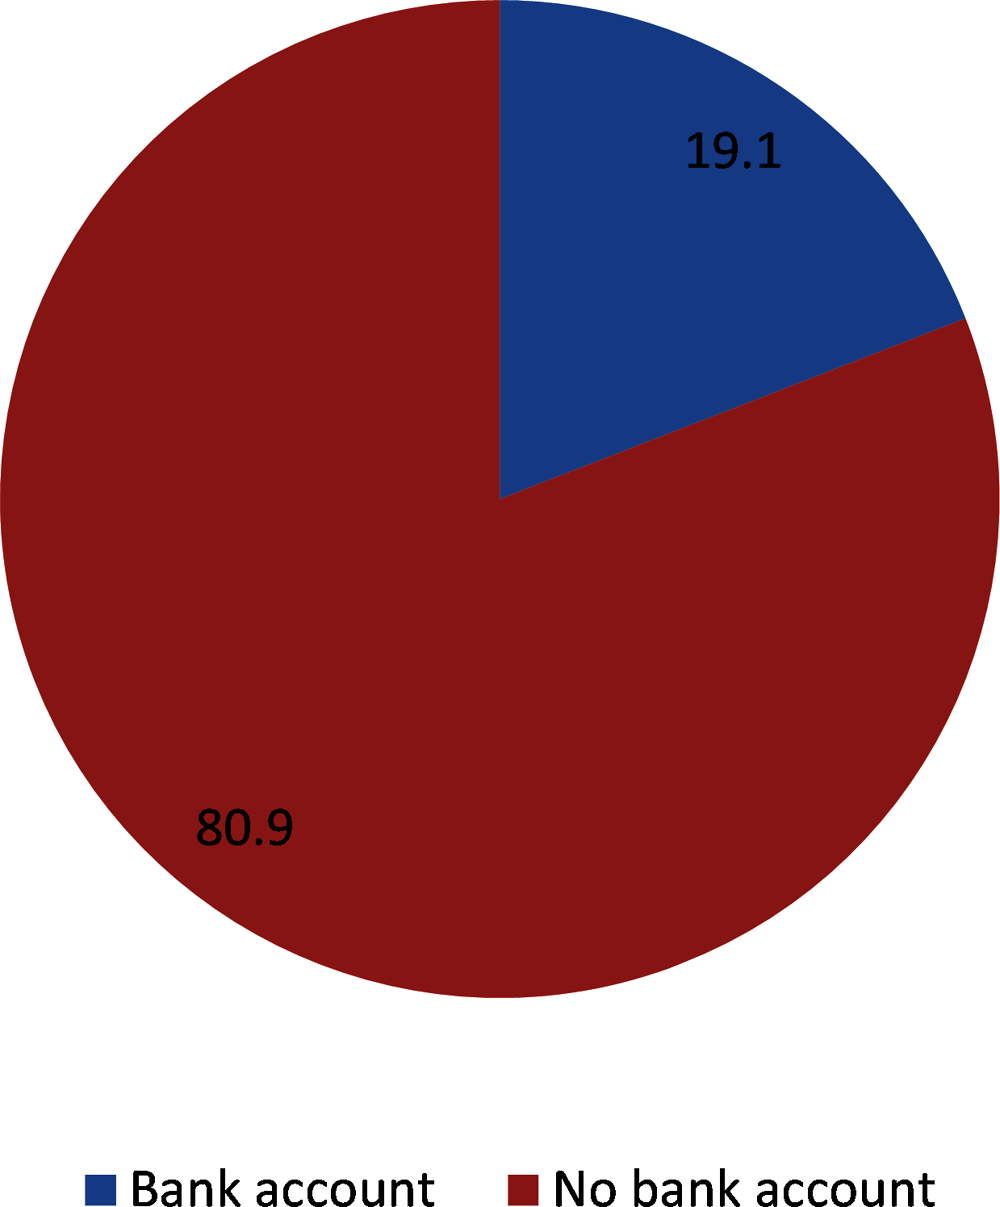 Figure 4.8. Respondents with and without a bank account, in percentage